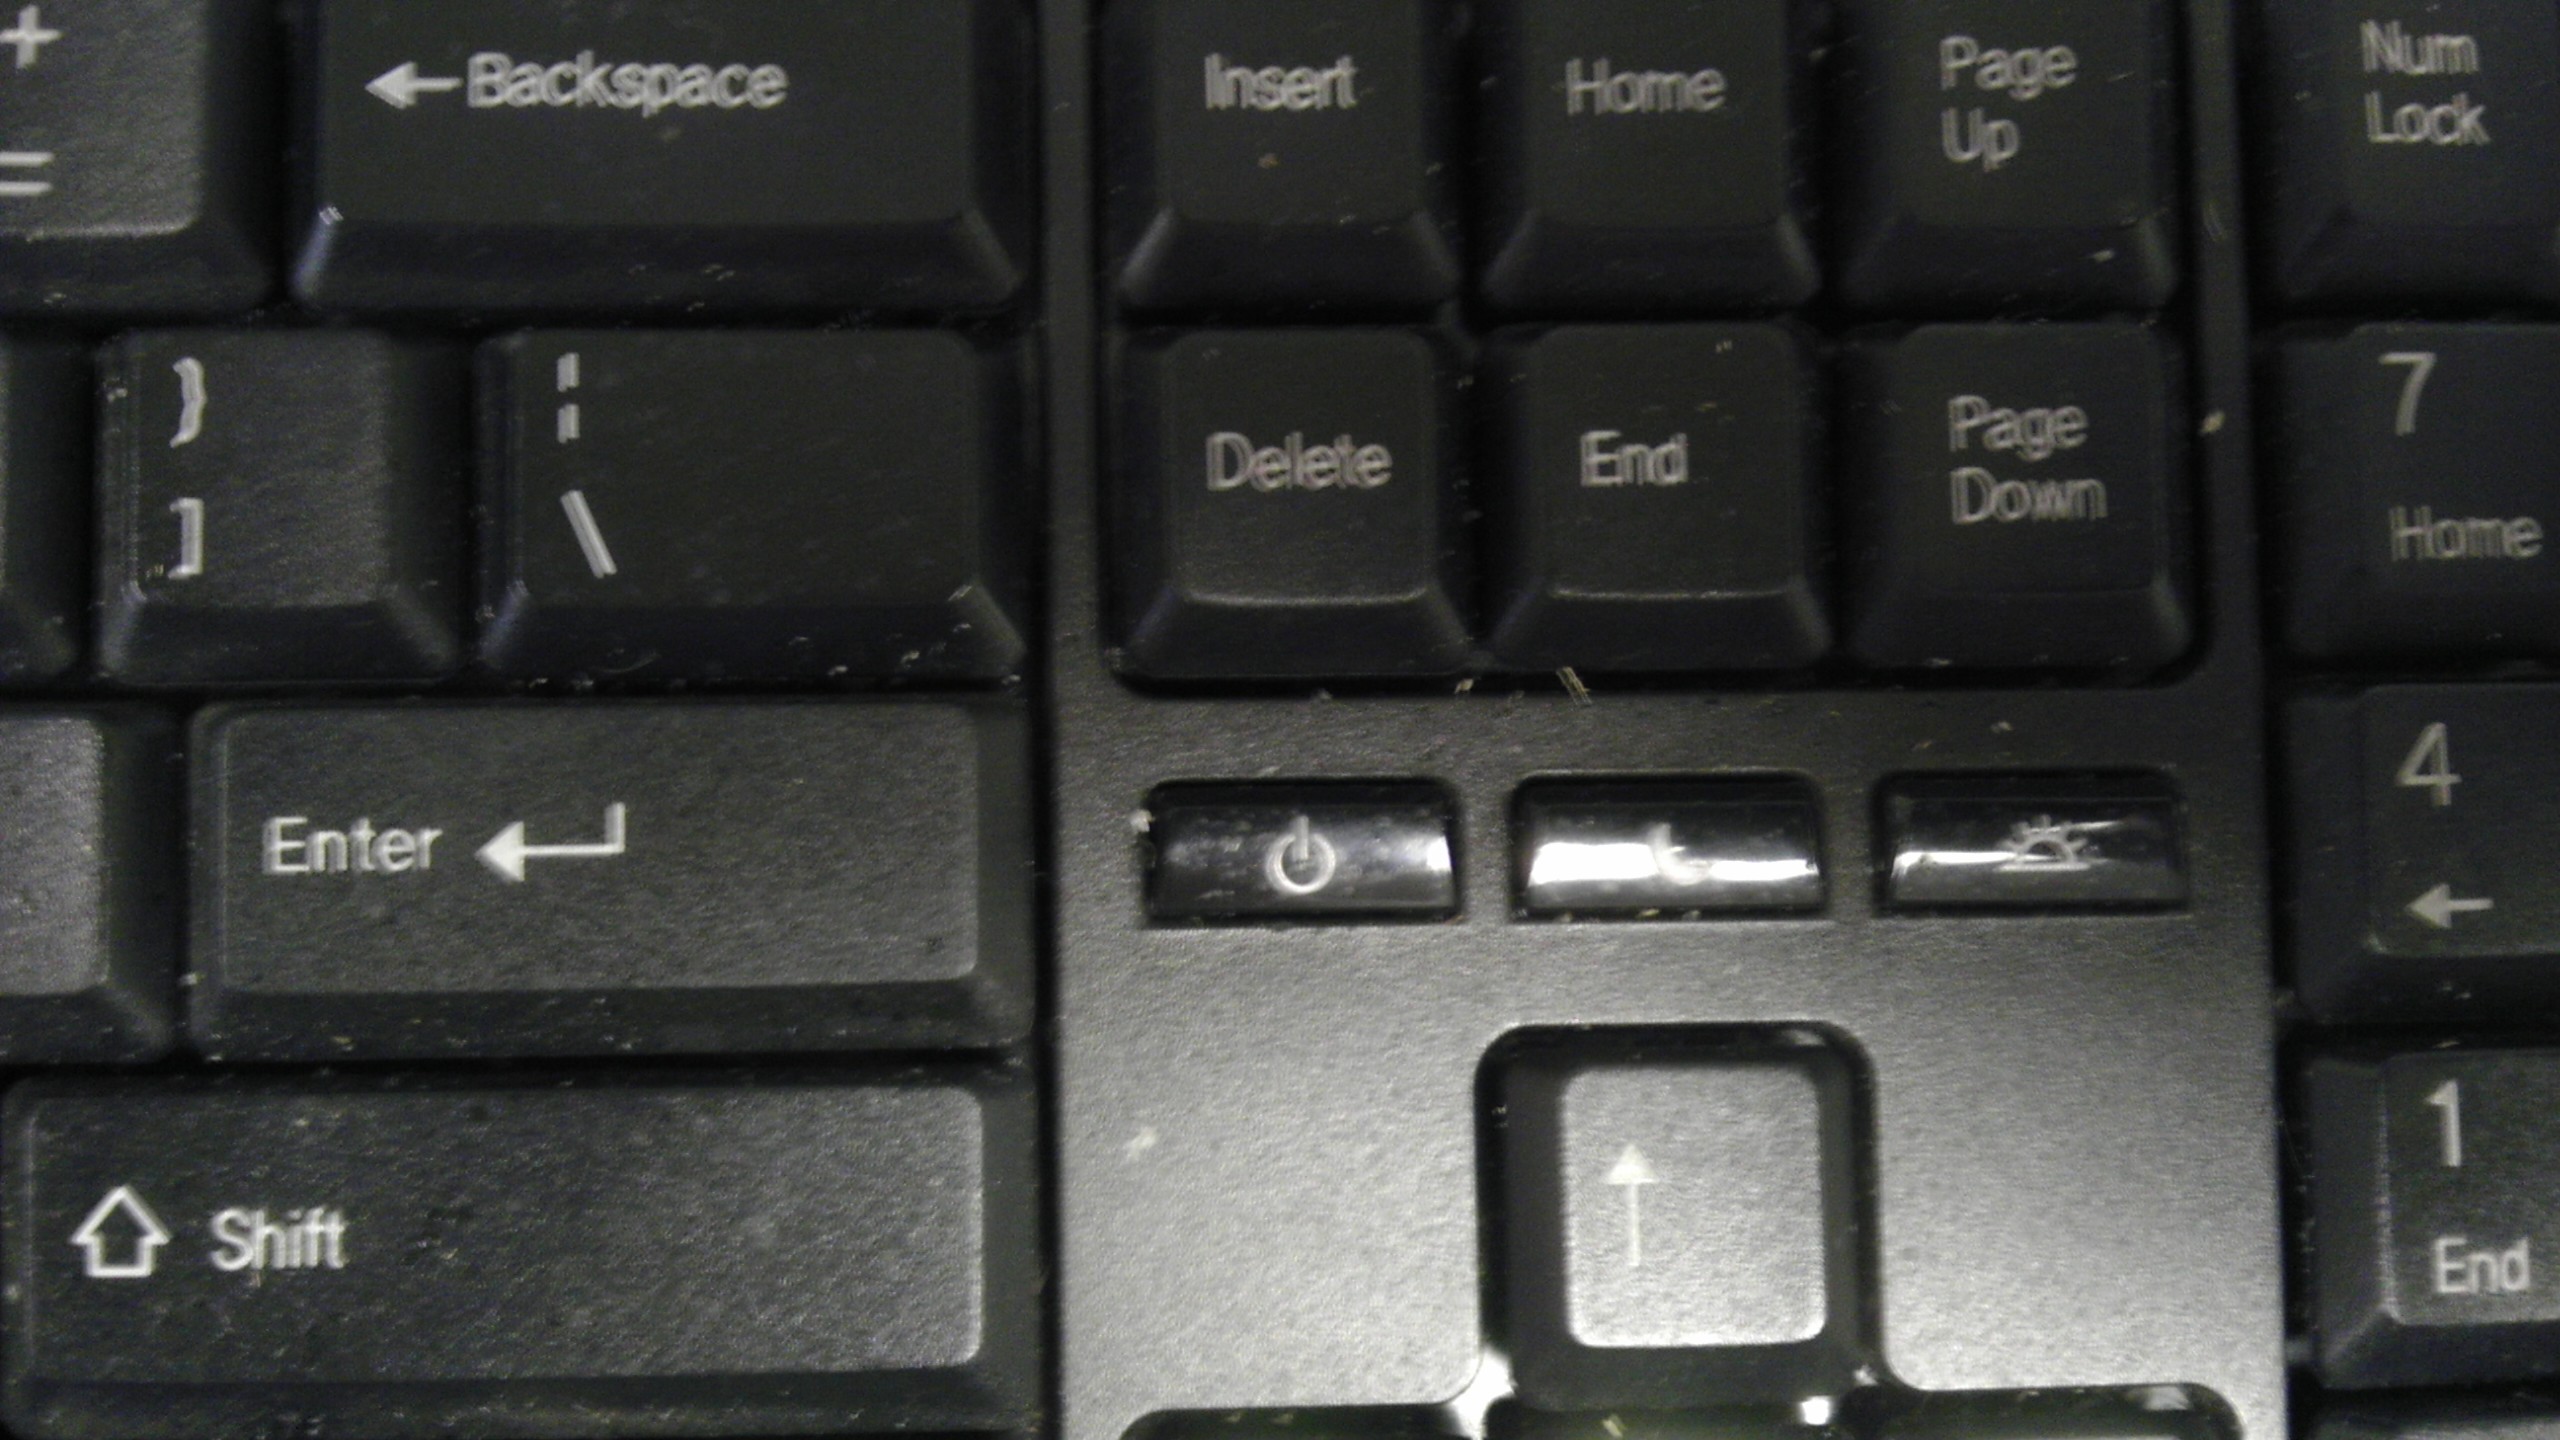 infuriating computer keyboard - Backspace Insert Home Page Ud 7 Delete End Page Down Home Enter Shift End